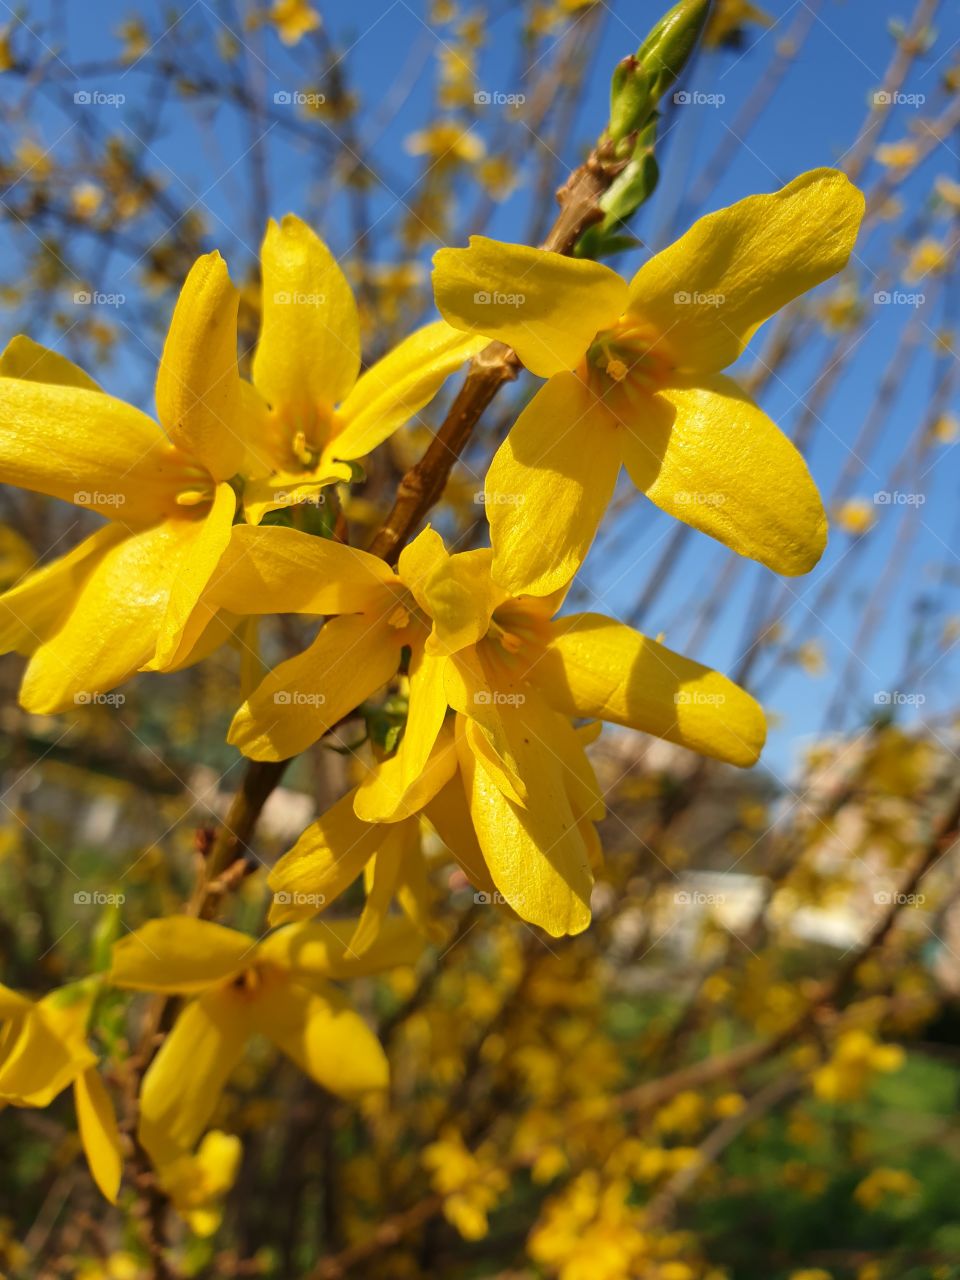 Spring time and yellow flowers